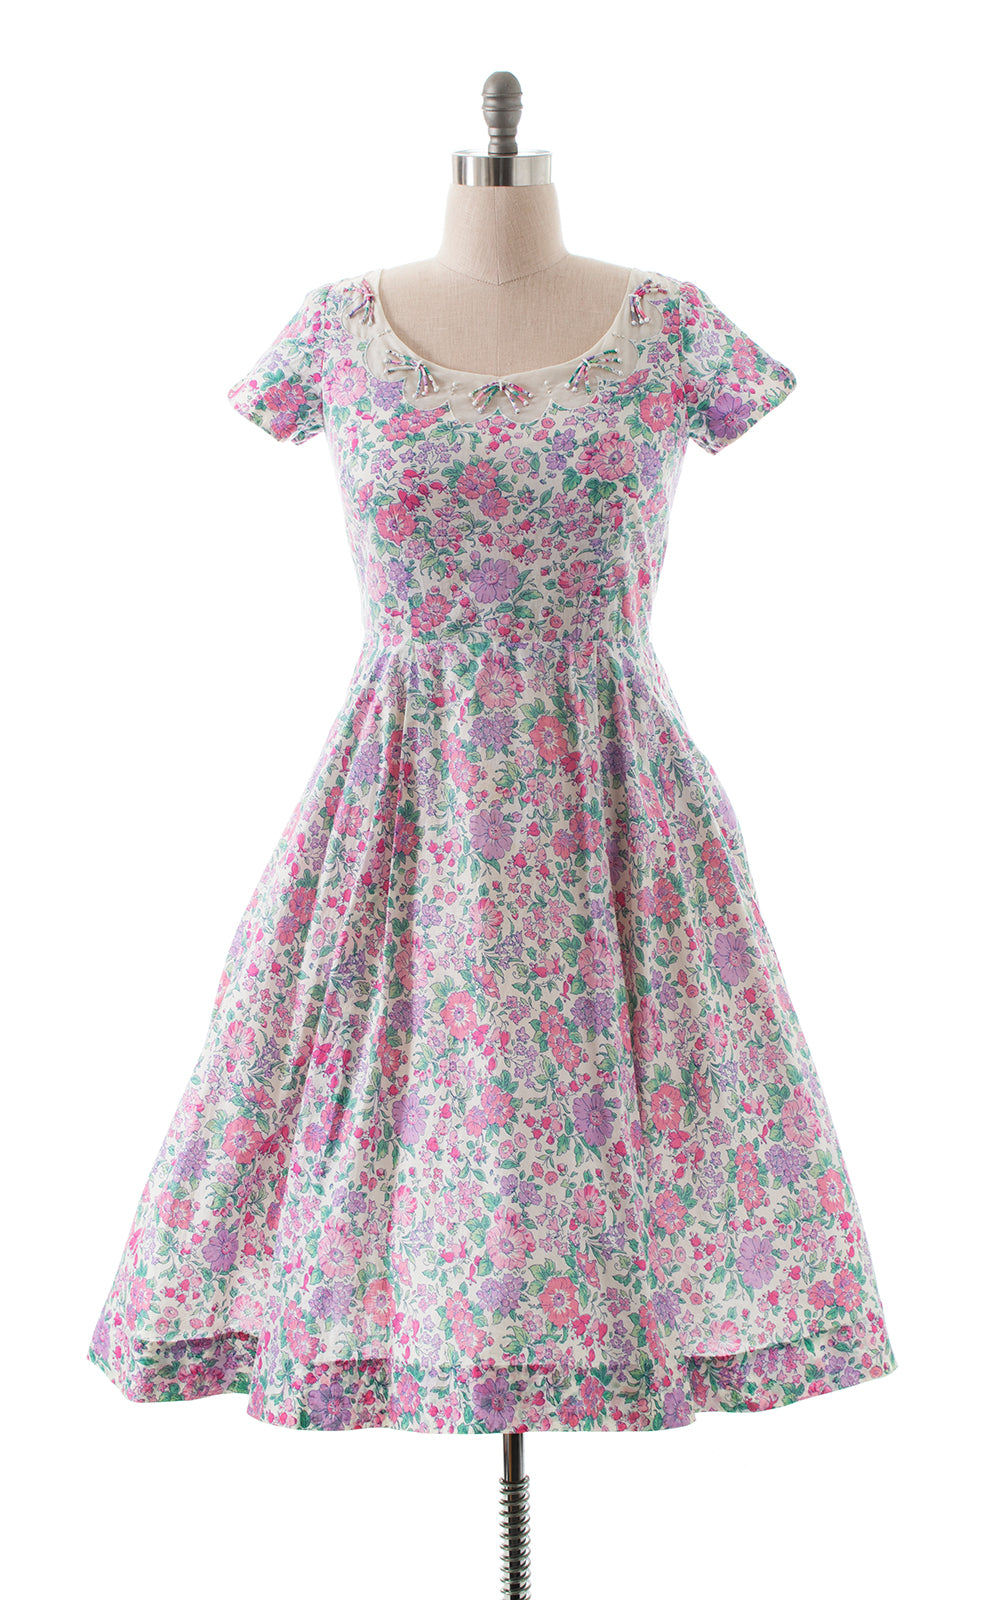 1950s LIBERTY OF LONDON Floral Dress with Pockets | large